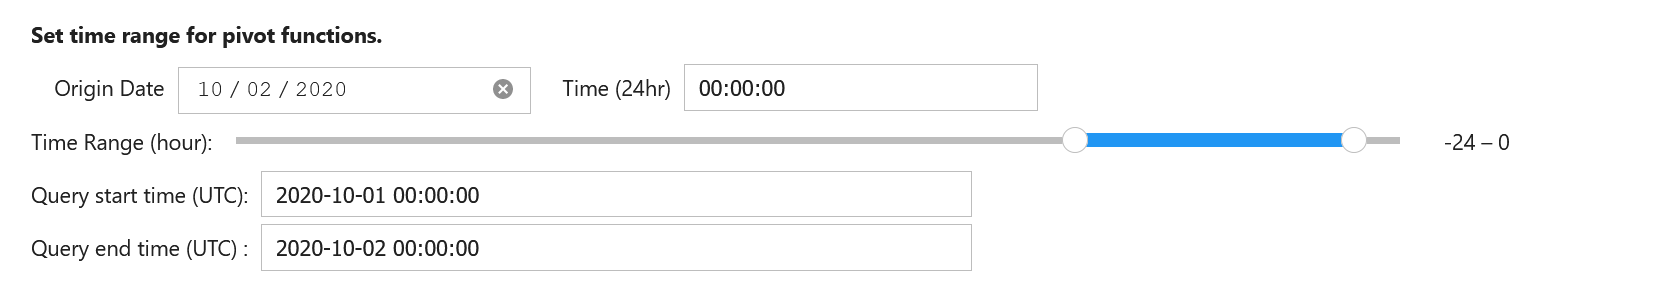 MSTICPy query time control.